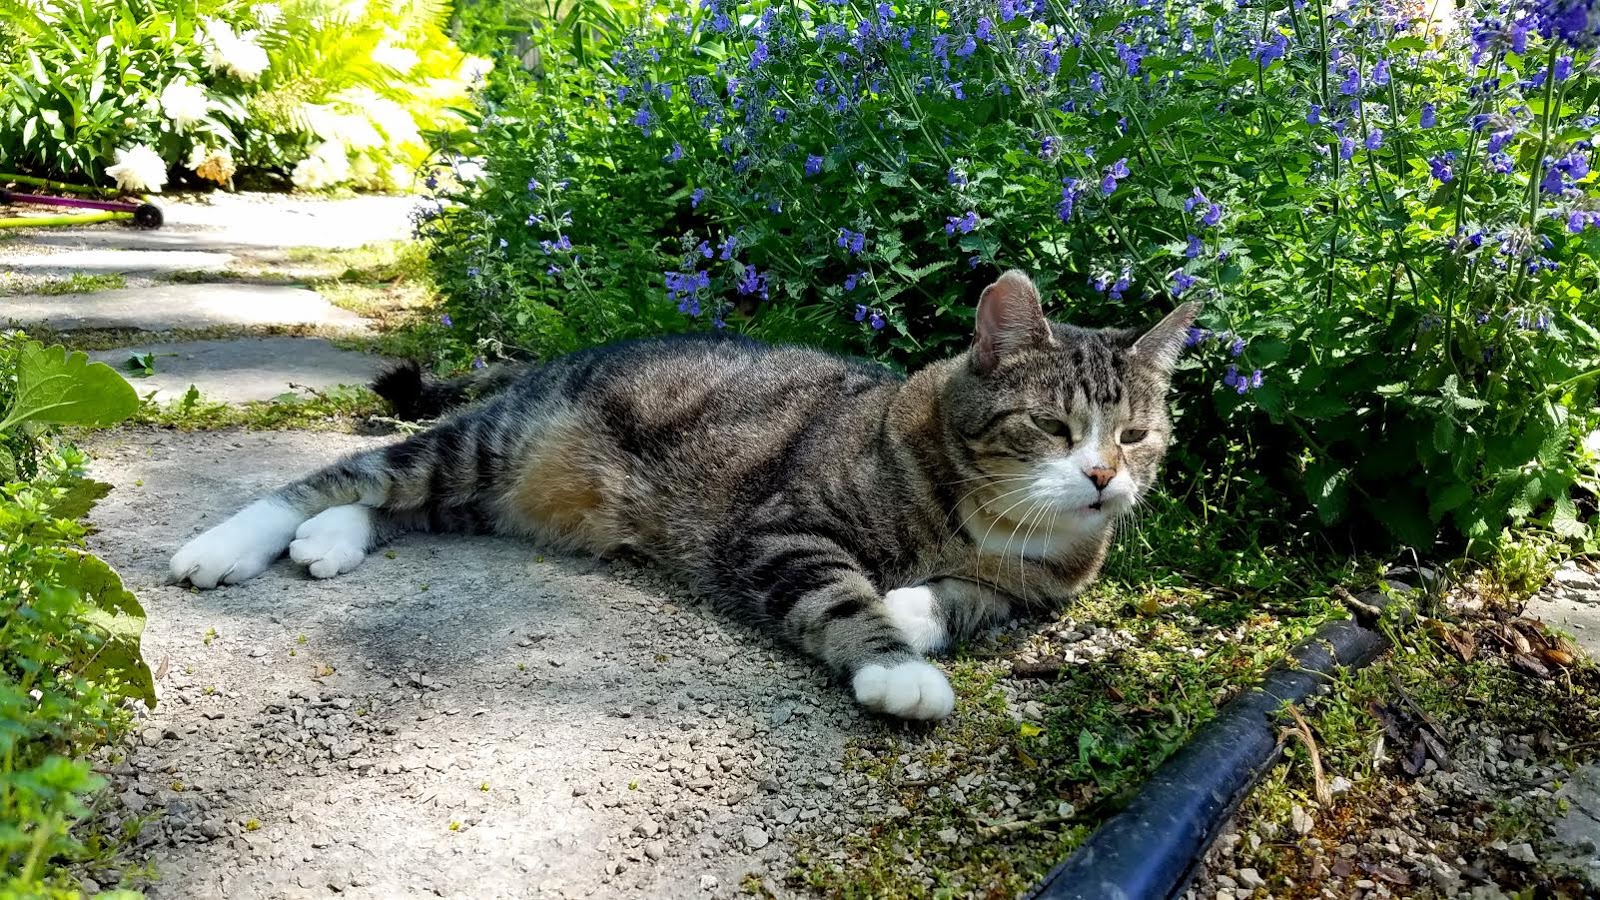 Cats in Gardens: Puss 'n Boots